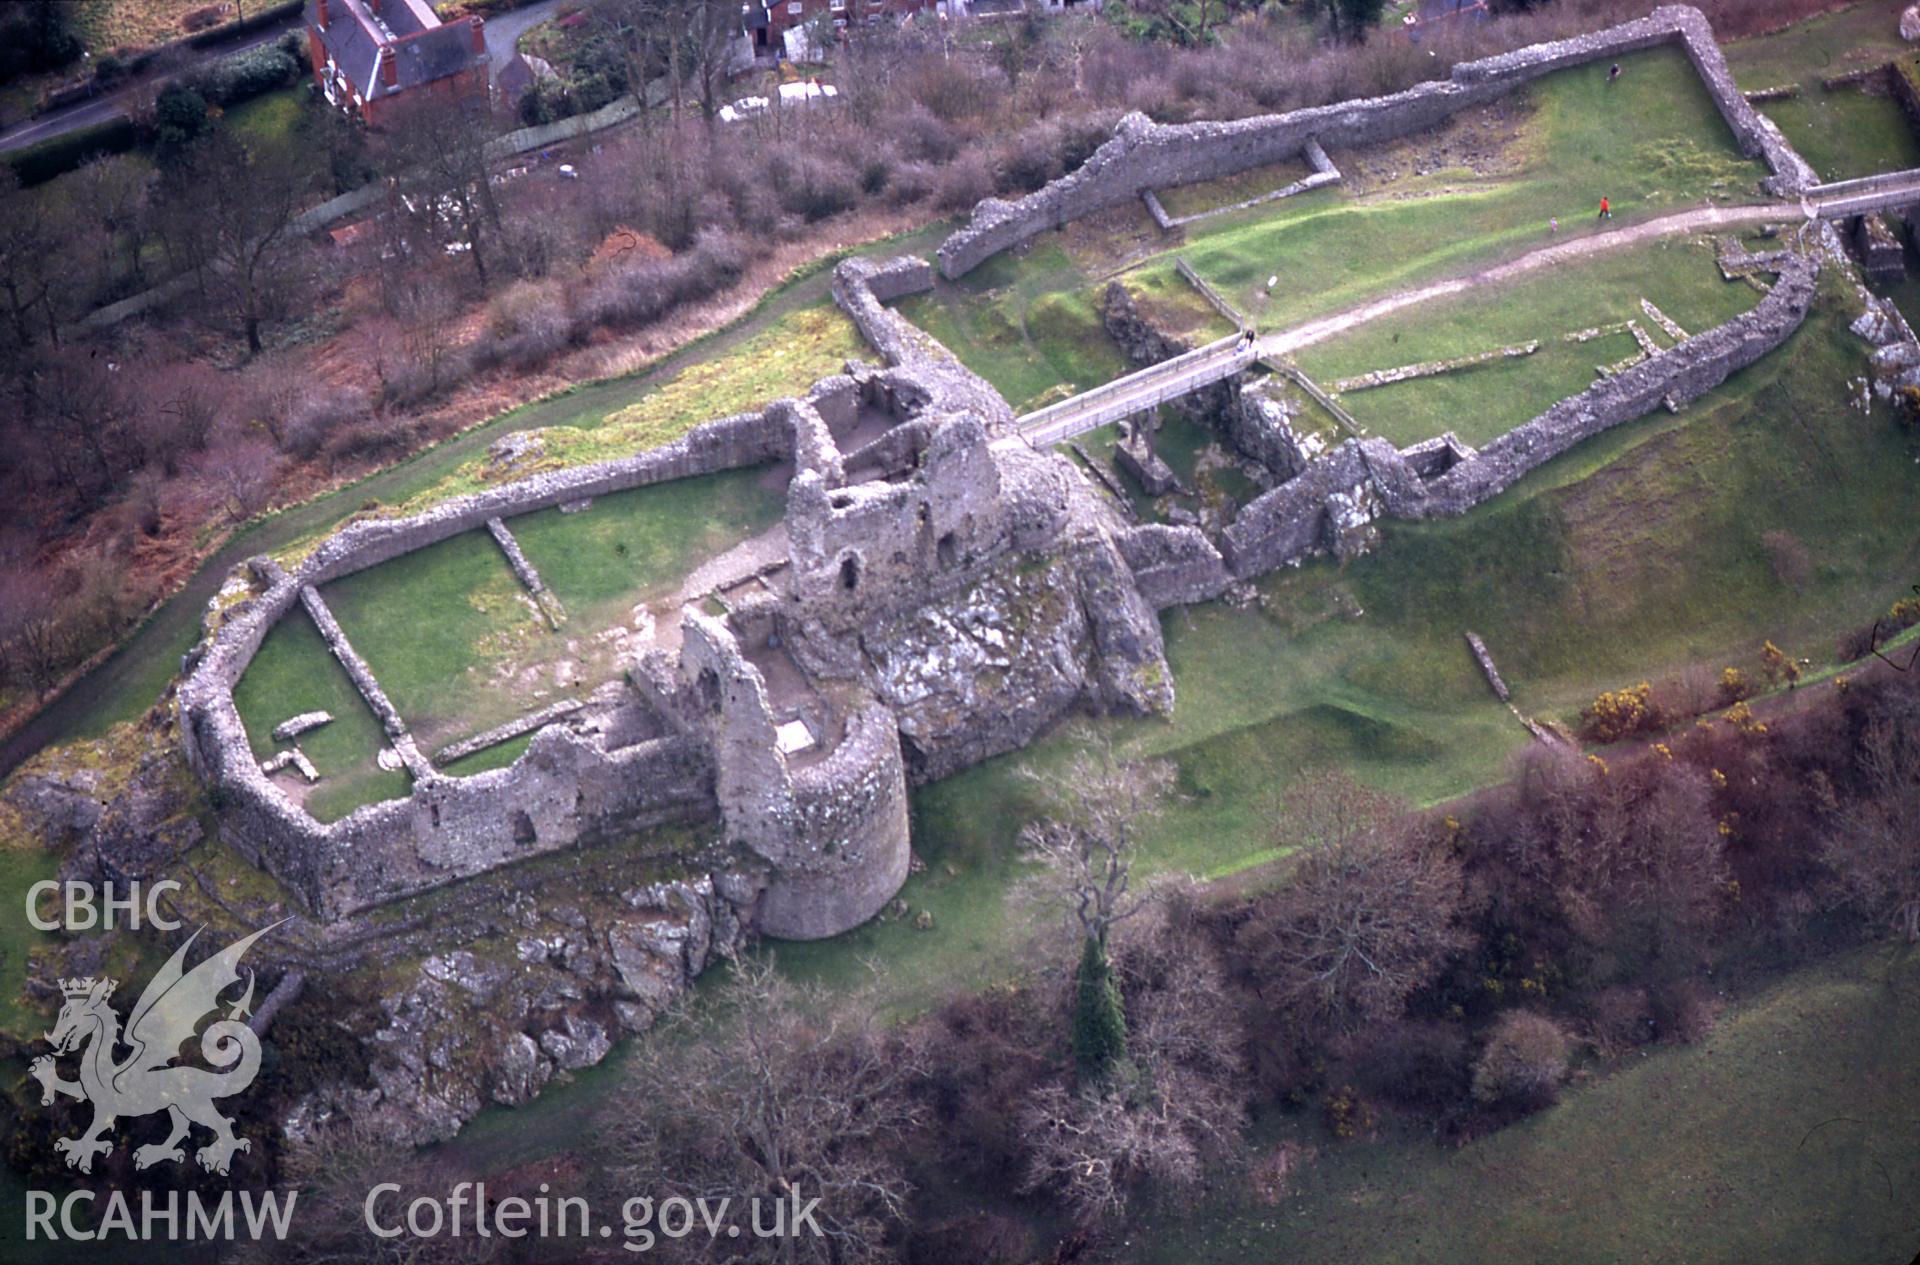 Slide of RCAHMW colour oblique aerial photograph of Montgomery Castle, taken by C.R. Musson, 14/3/1999.